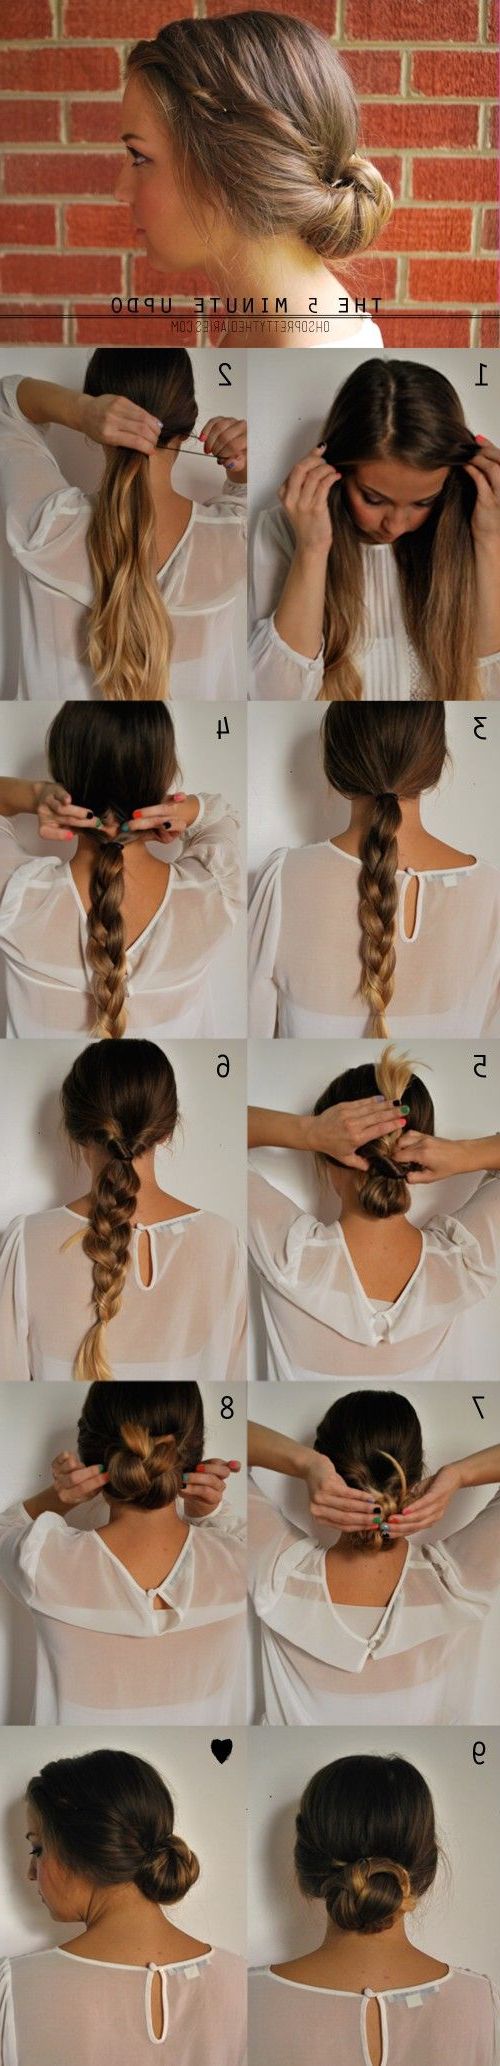 20 Gorgeous 5 Minute Hairstyles To Save You Some Snooze Time | 5 Minute  Hairstyles, Medium Length Hair Styles, Medium Hair Styles Throughout 2018 Easy Medium Length Hairstyles For Thick Wavy Hair (View 2 of 25)